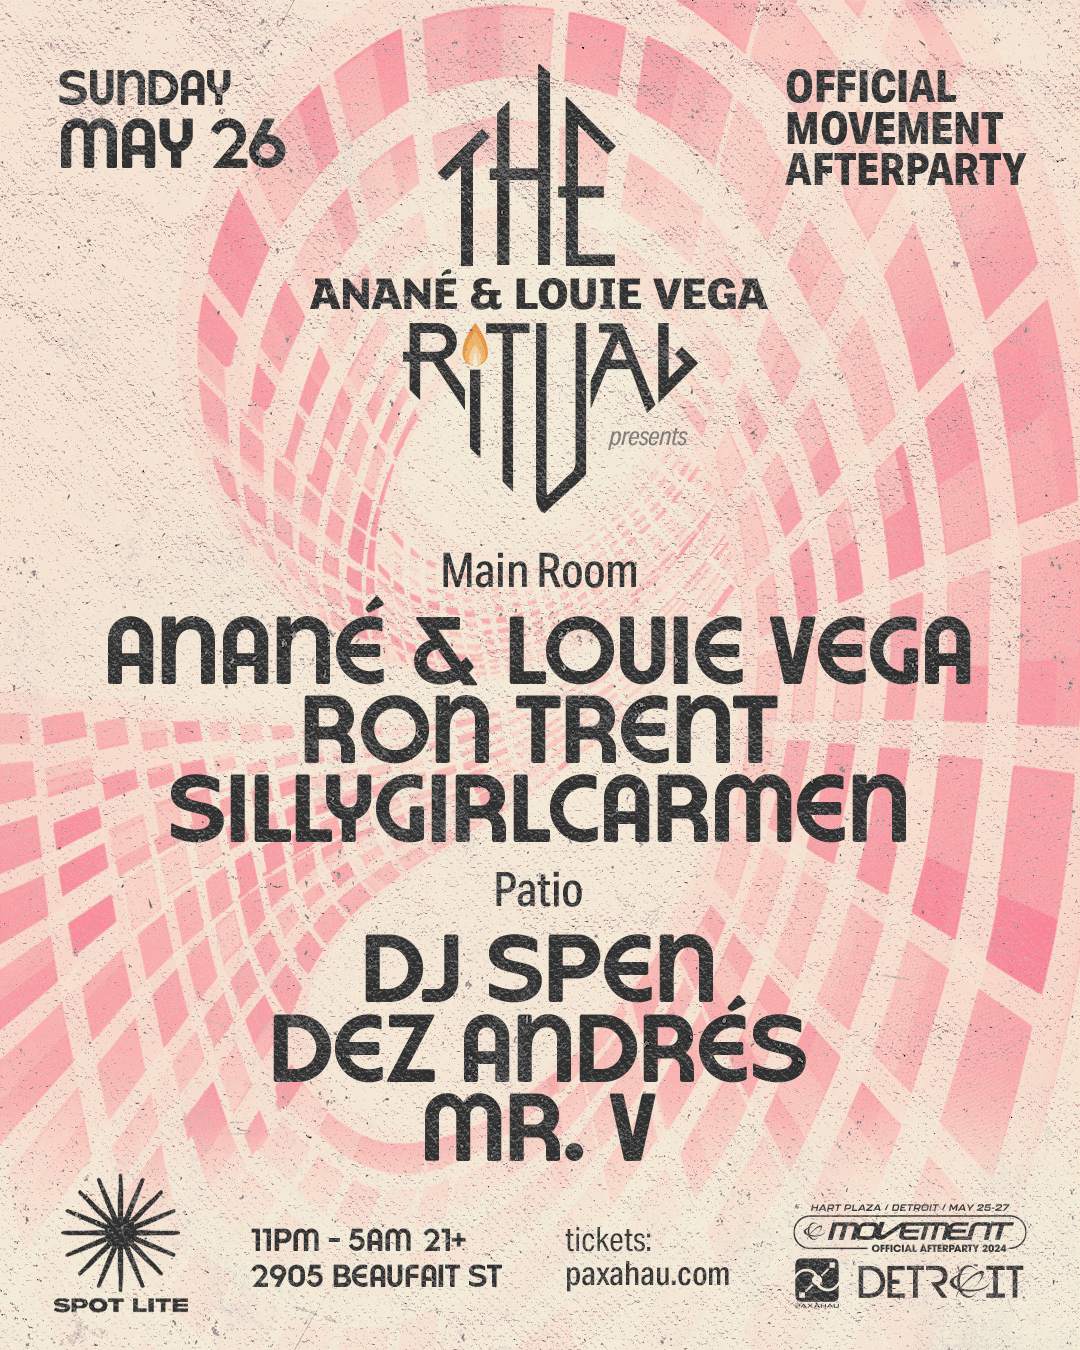 The Ritual with Anané & Louie Vega - Official Movement Afterparty - フライヤー表